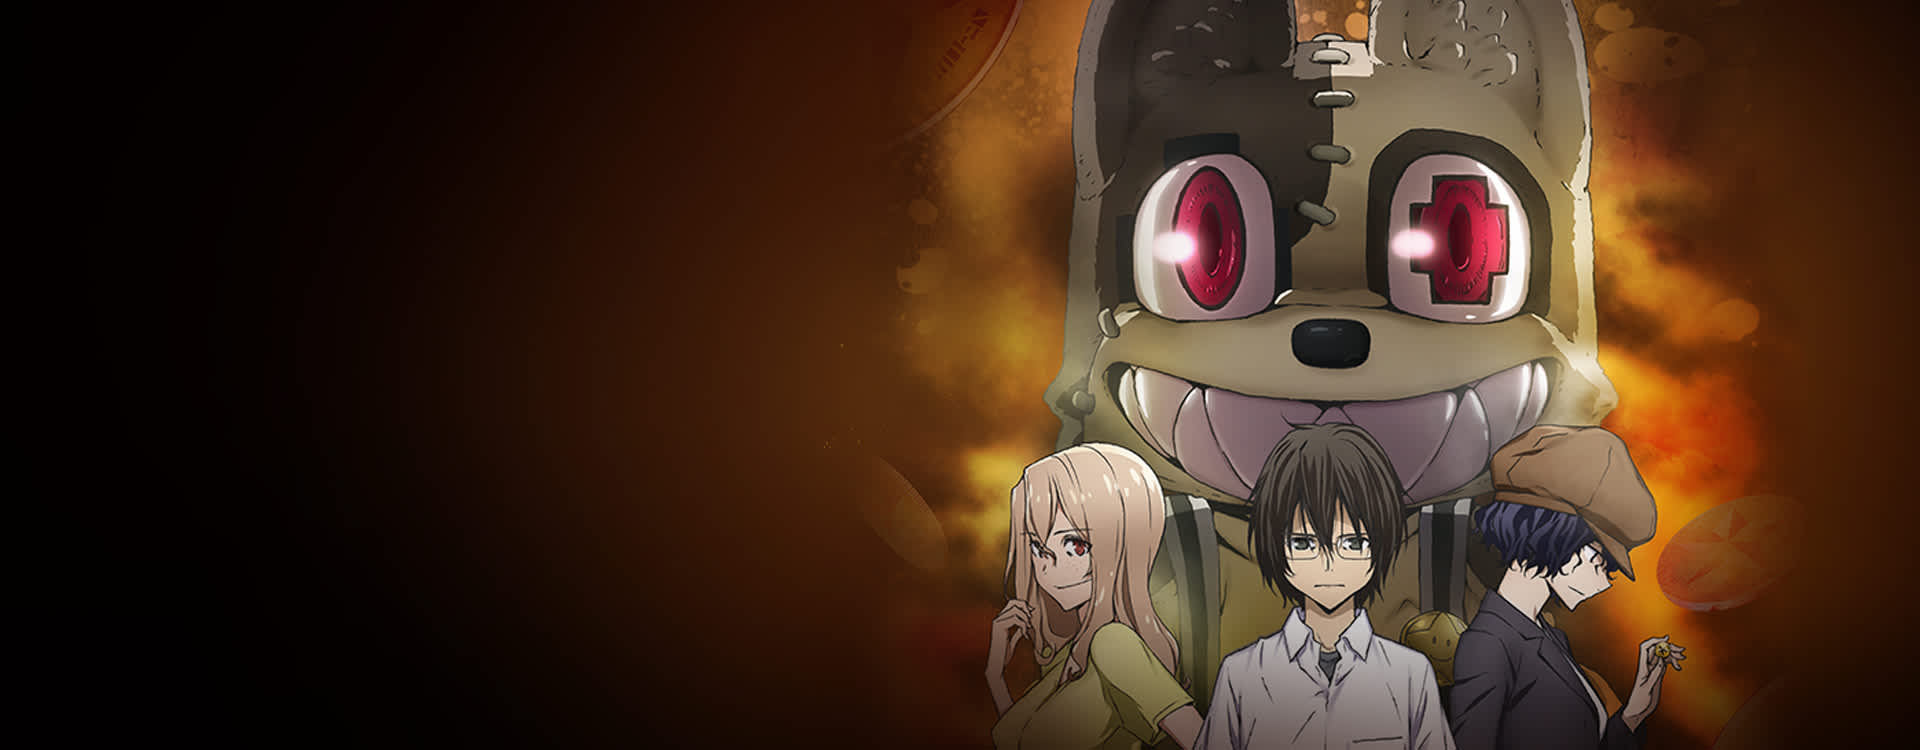 If Five Nights At Freddys Was An Anime, It Would Be Gleipnir